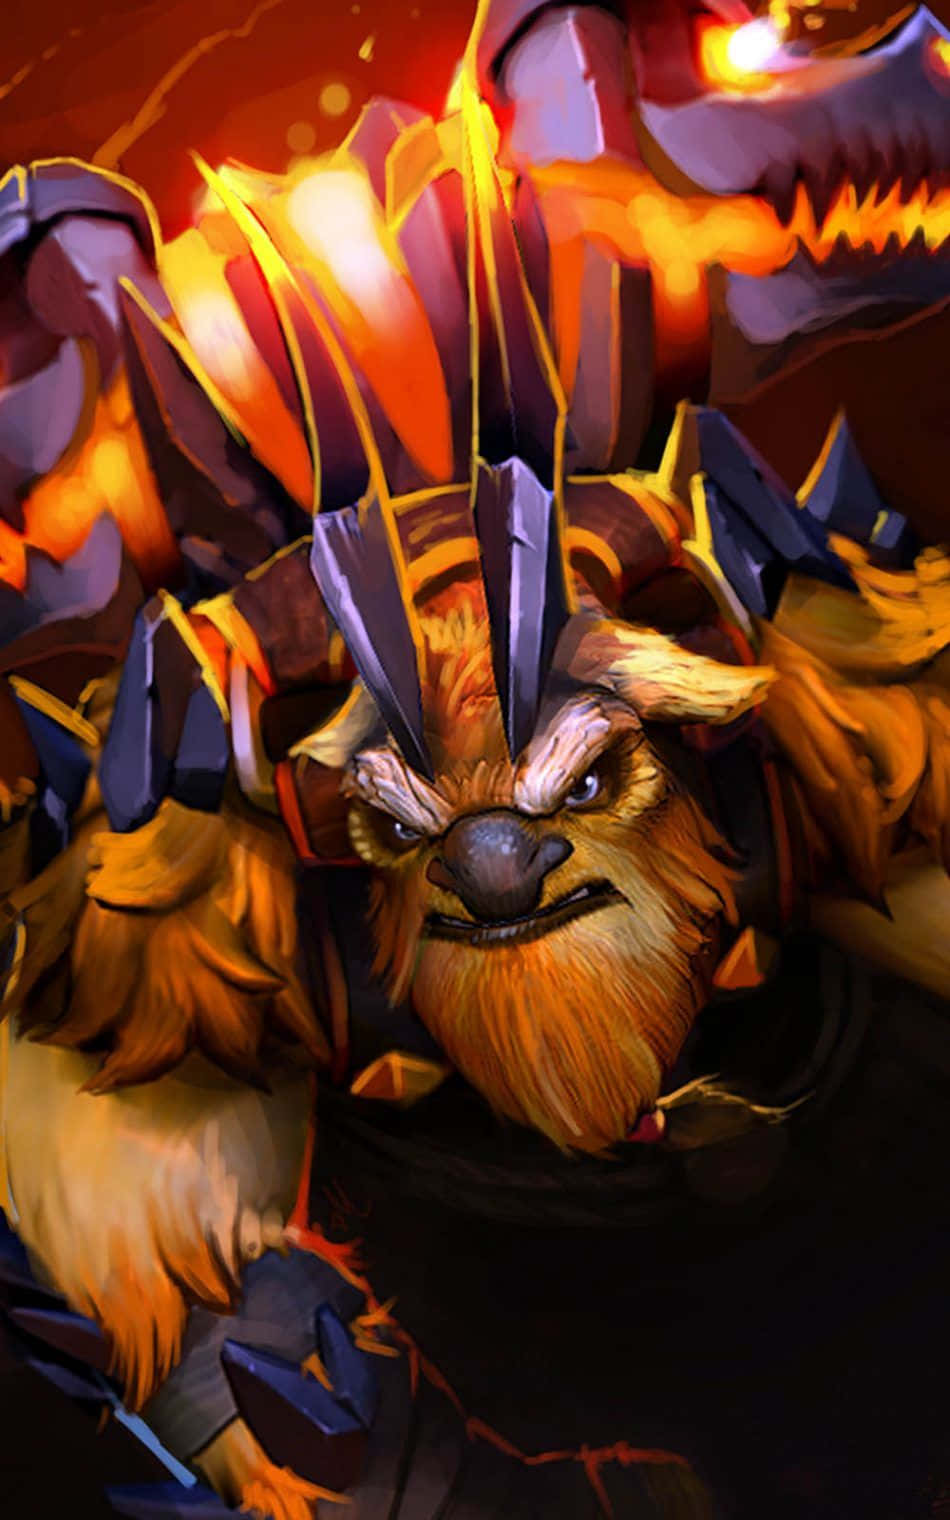 Stunning Dota 2 heroes gathered for an epic battle